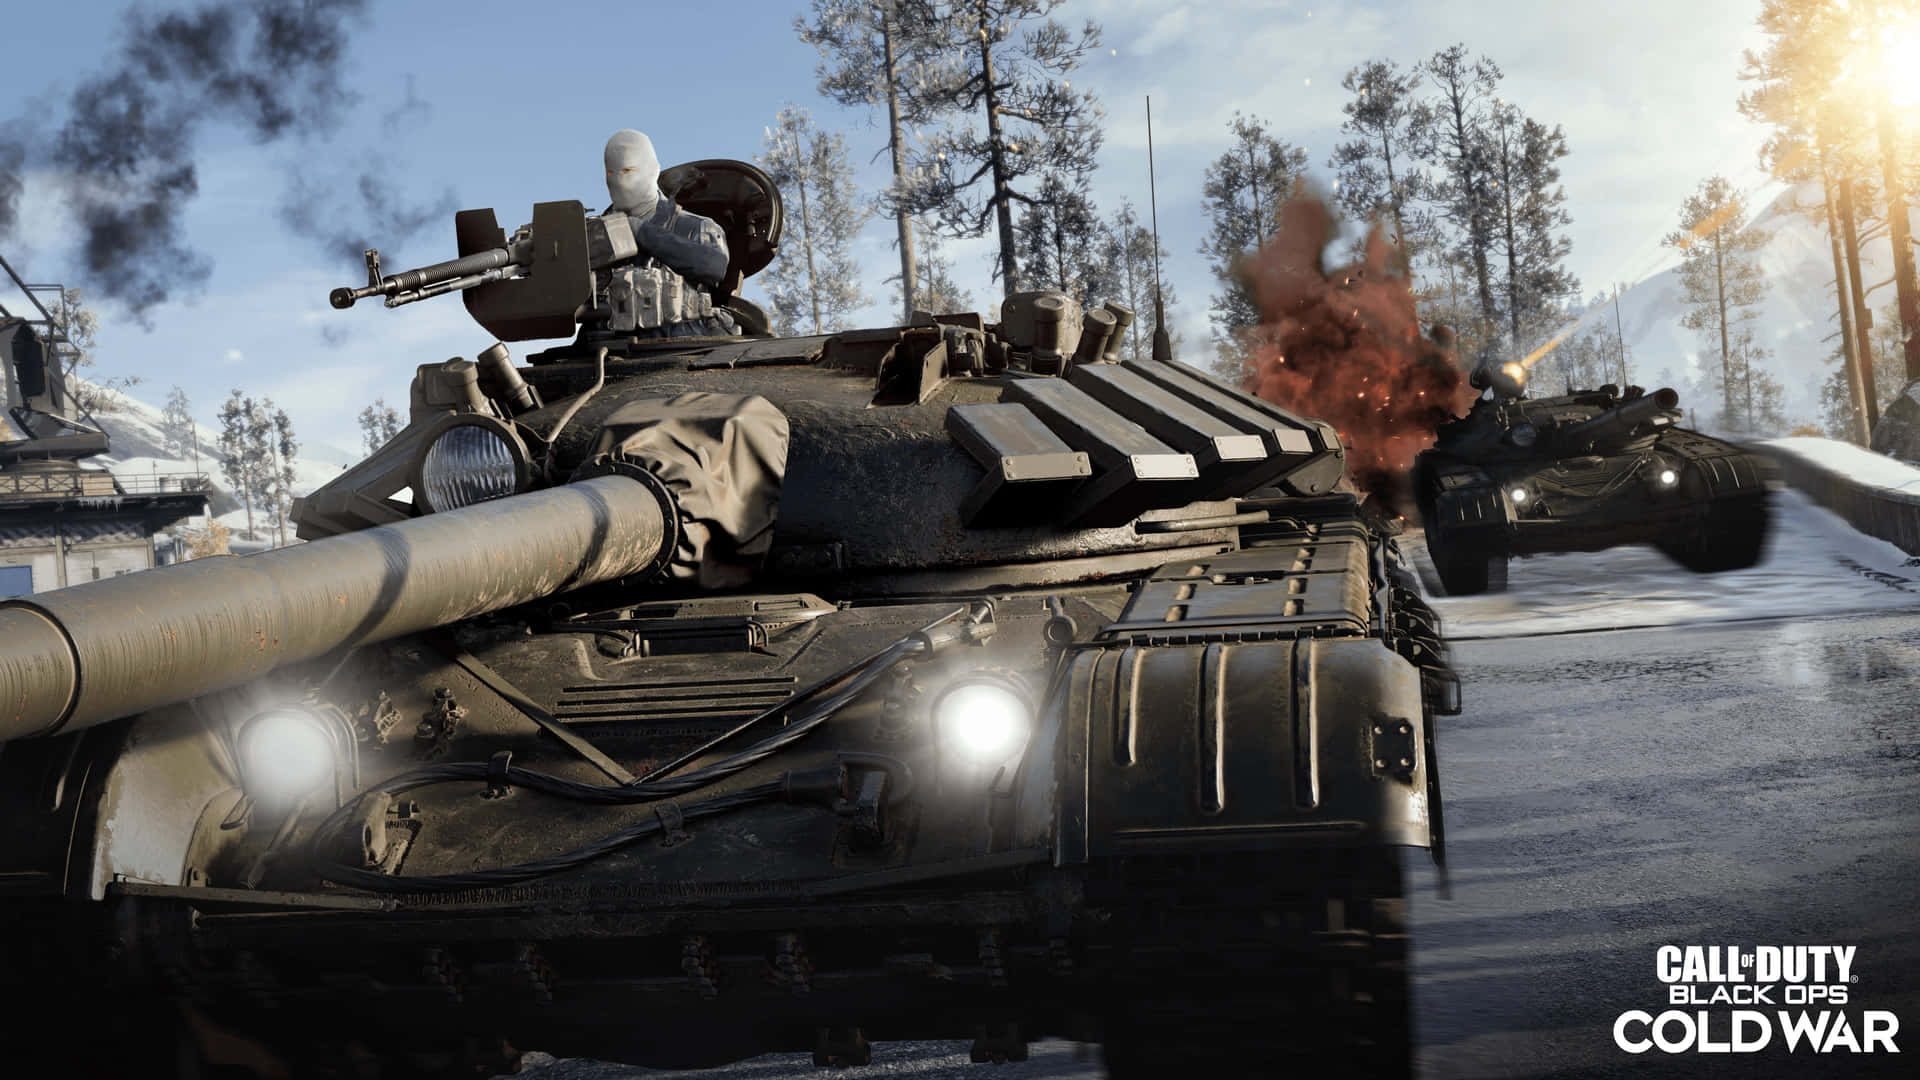 Battle Tank Hd Call Of Duty Black Ops Cold War Background